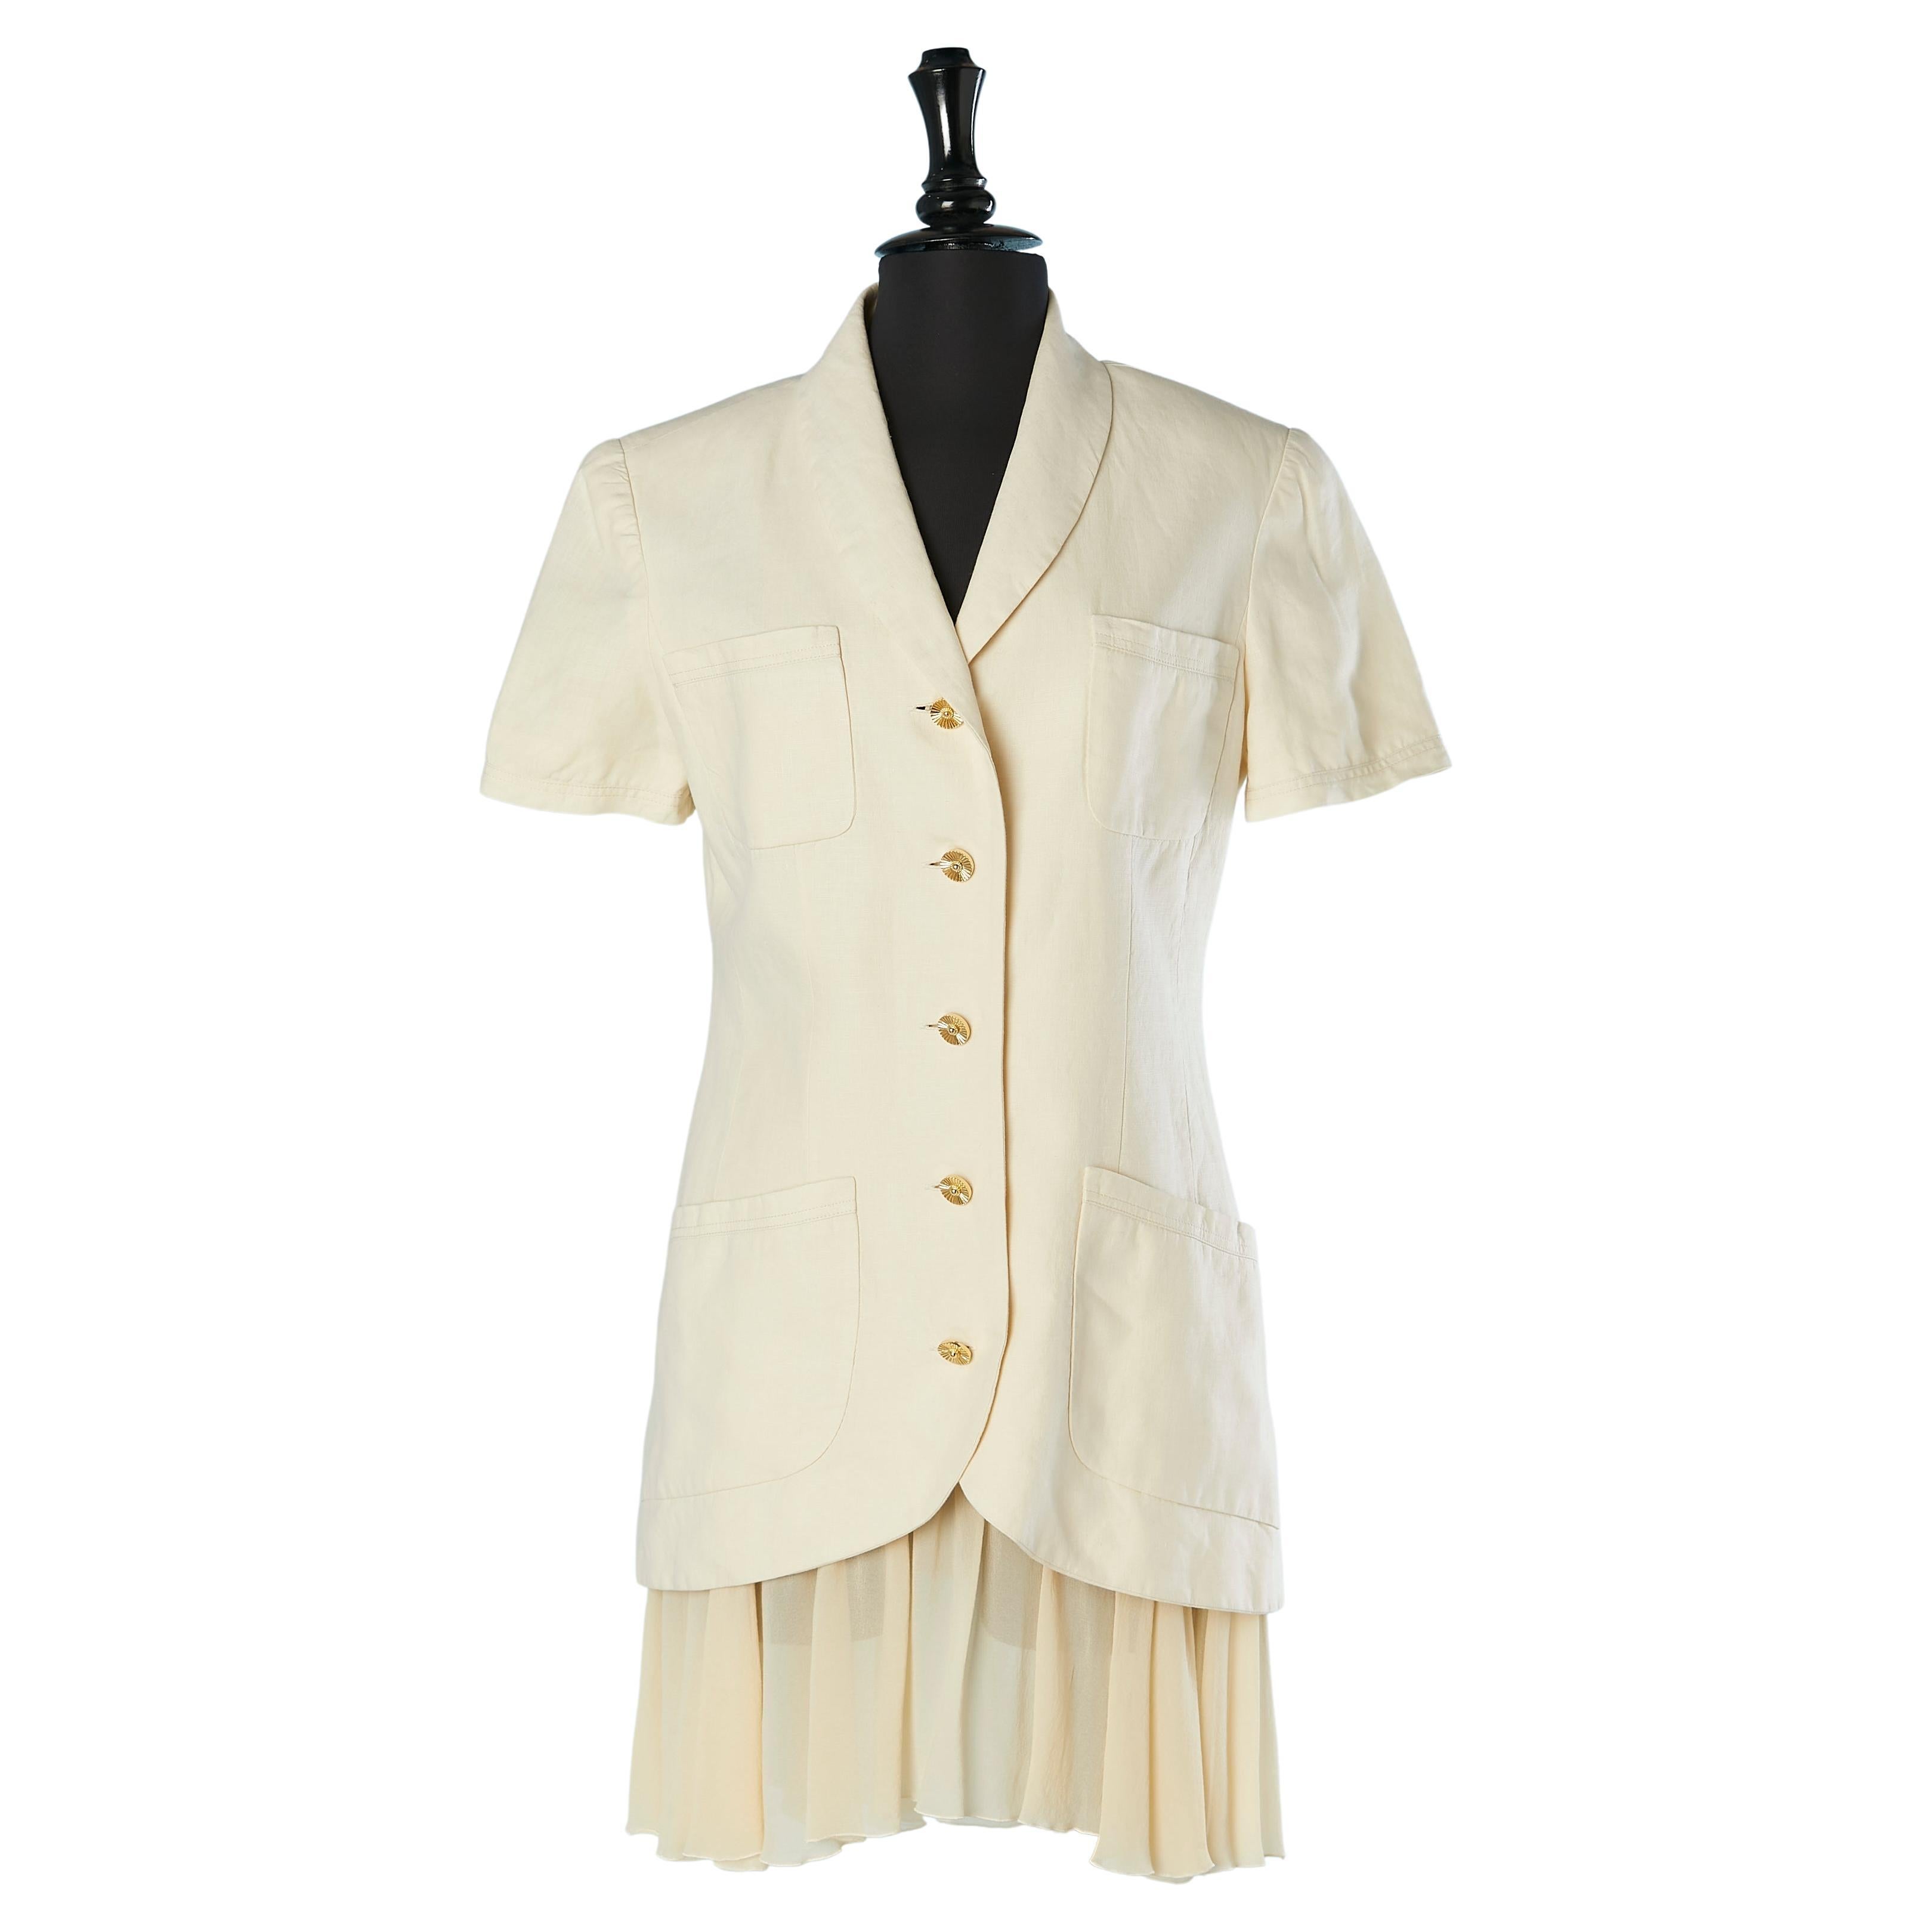 Off-white linen and silk chiffon skirt-suit  Chanel Boutique  For Sale